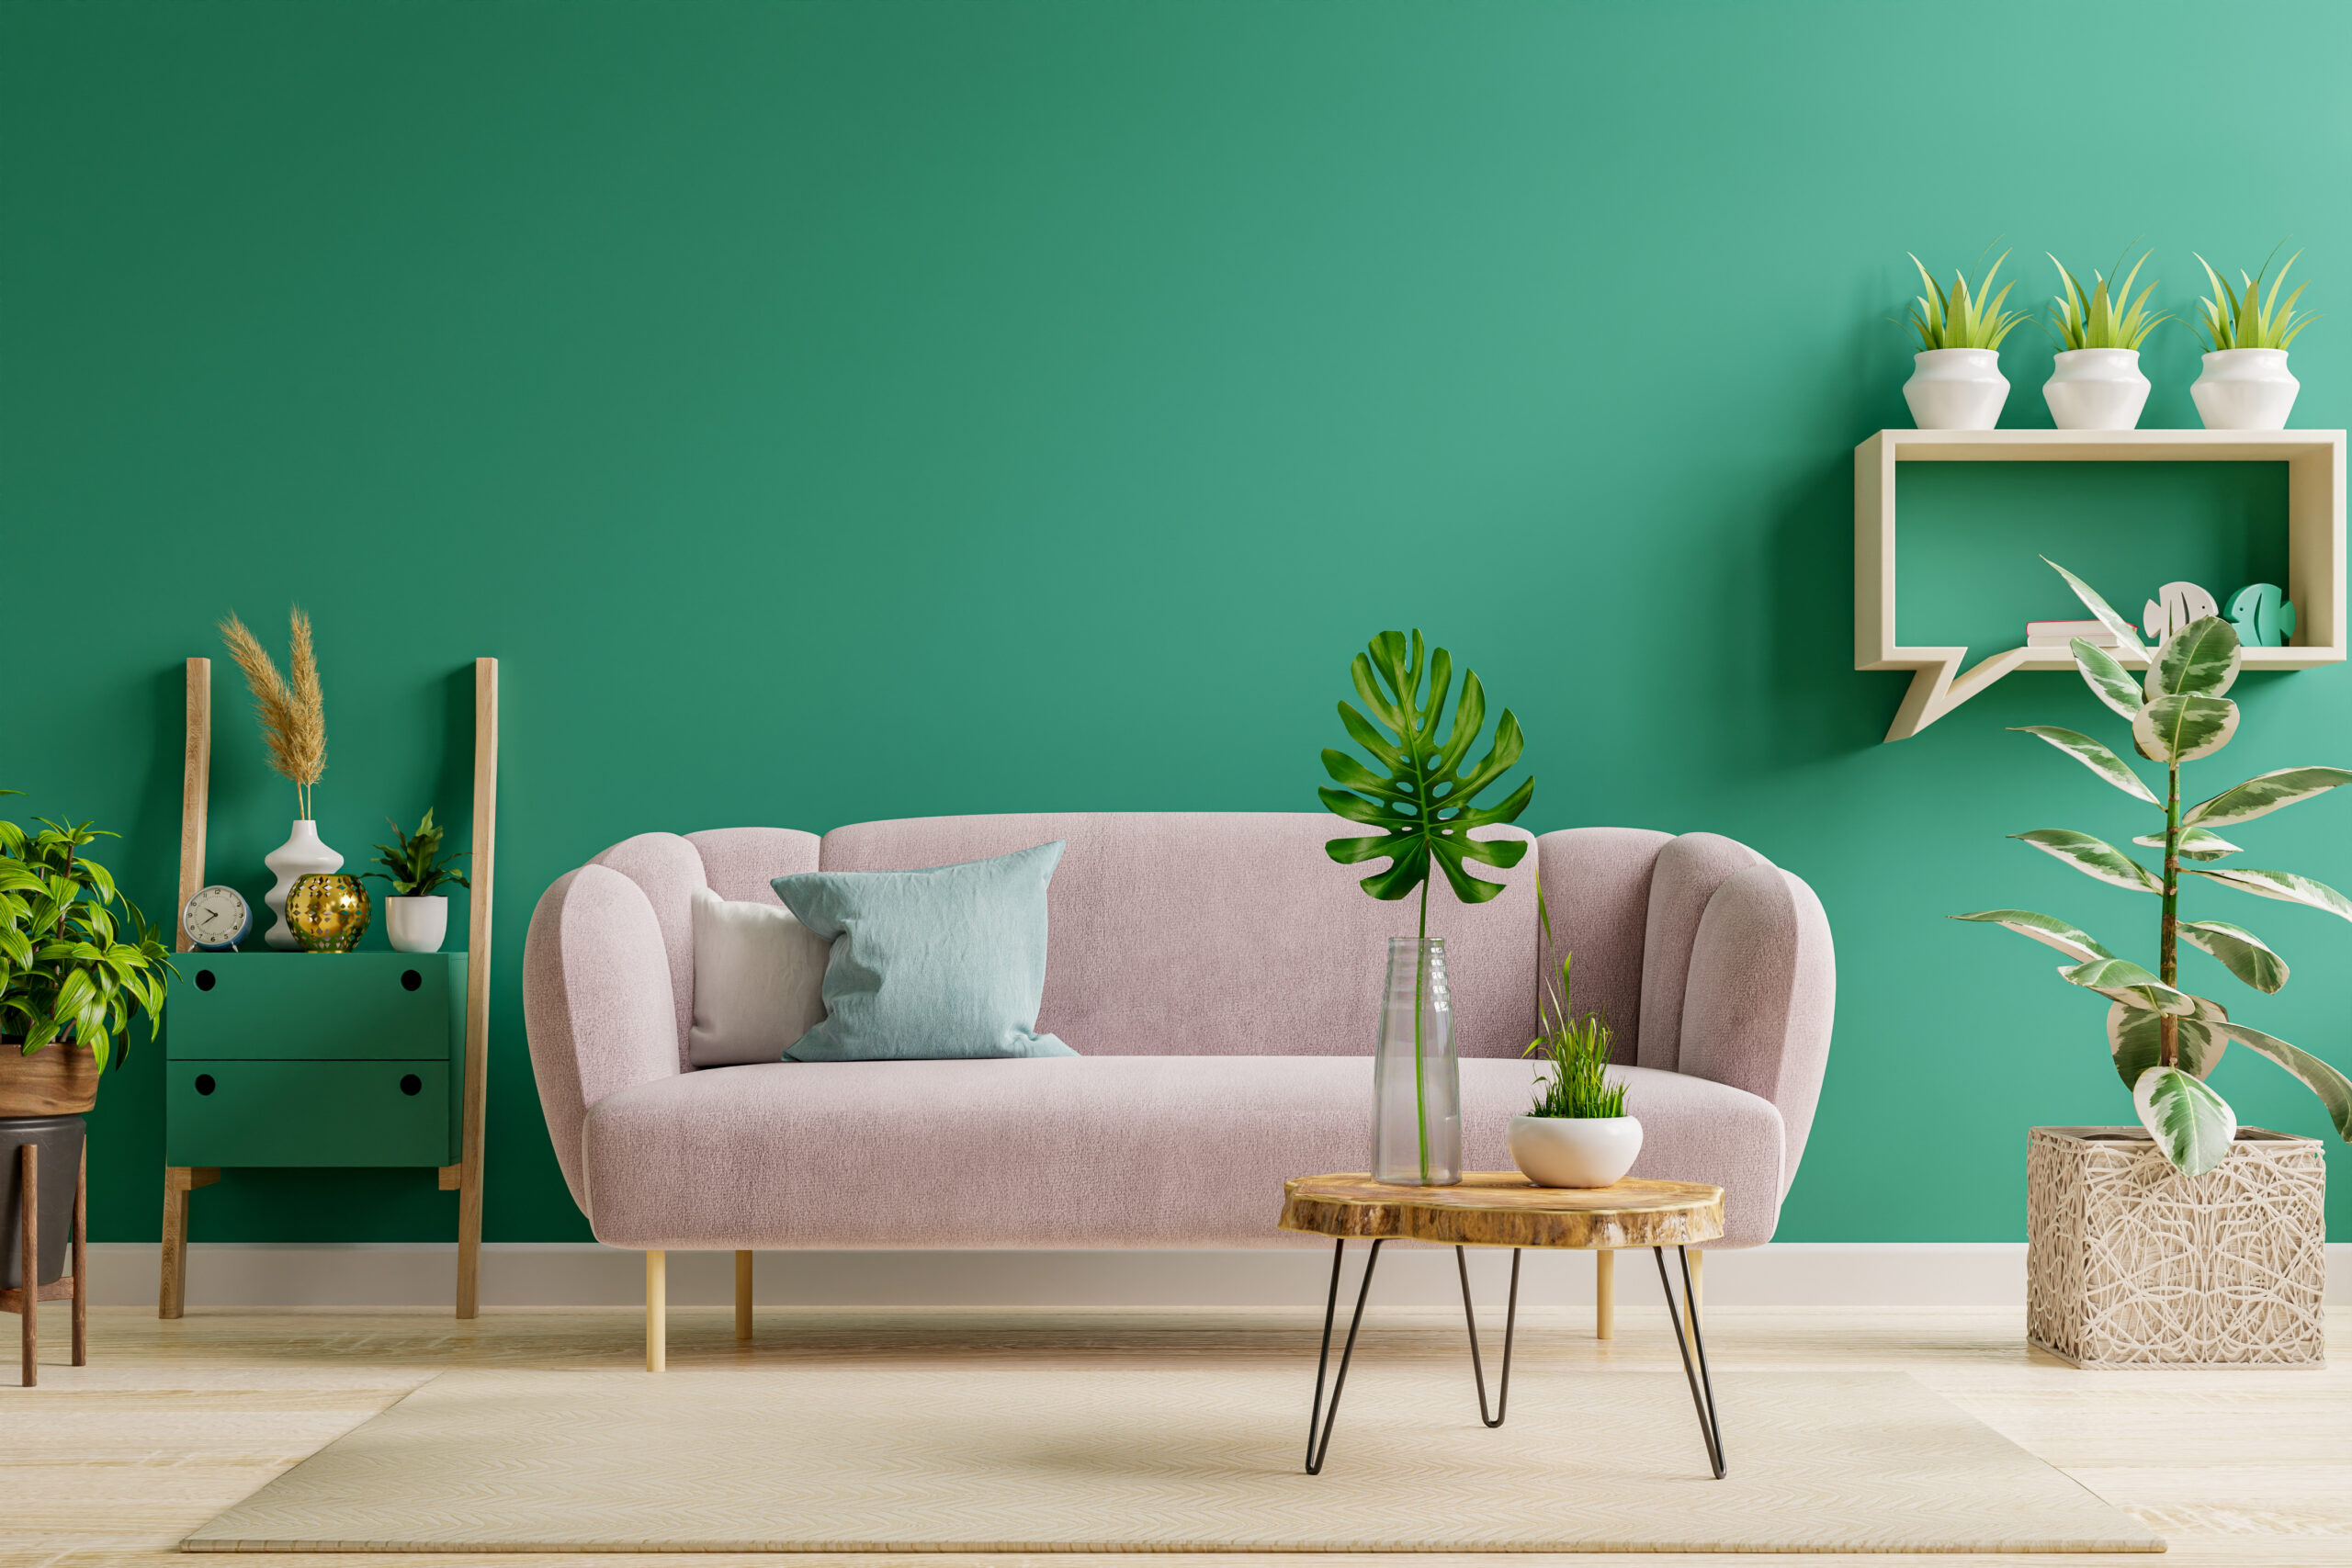 green interior modern interior living room style with soft sofa green wall 3d rendering scaled